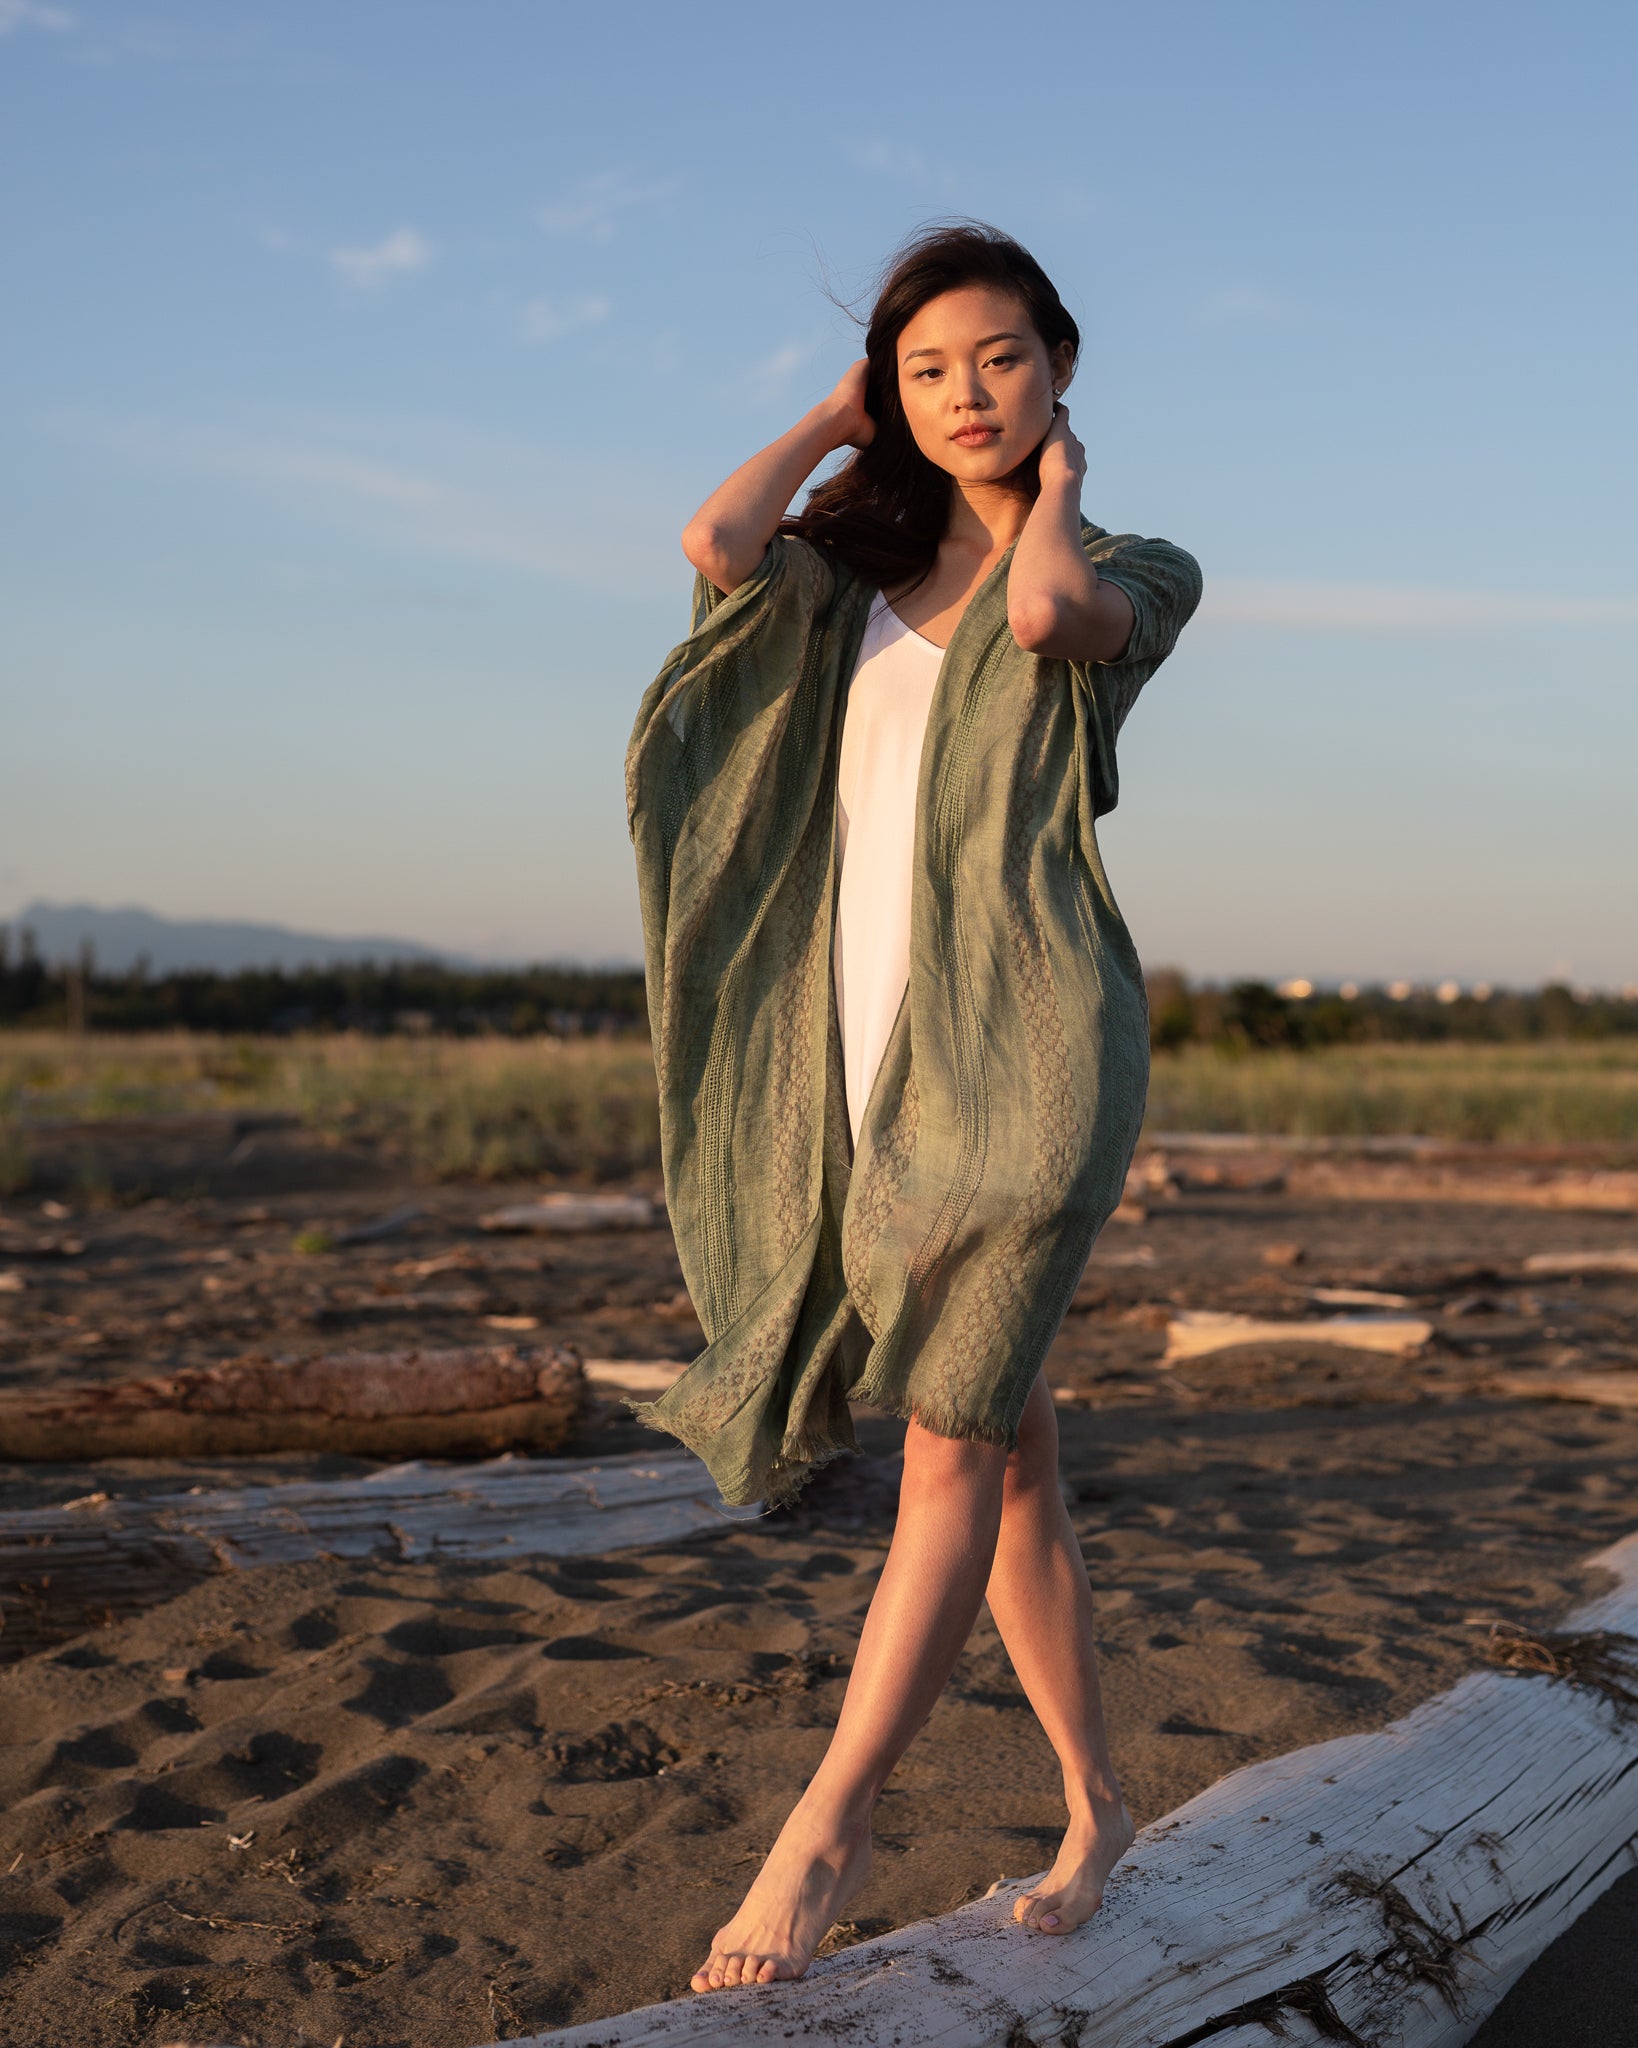 Woman staring at camera wearing green beach cover up standing on white log